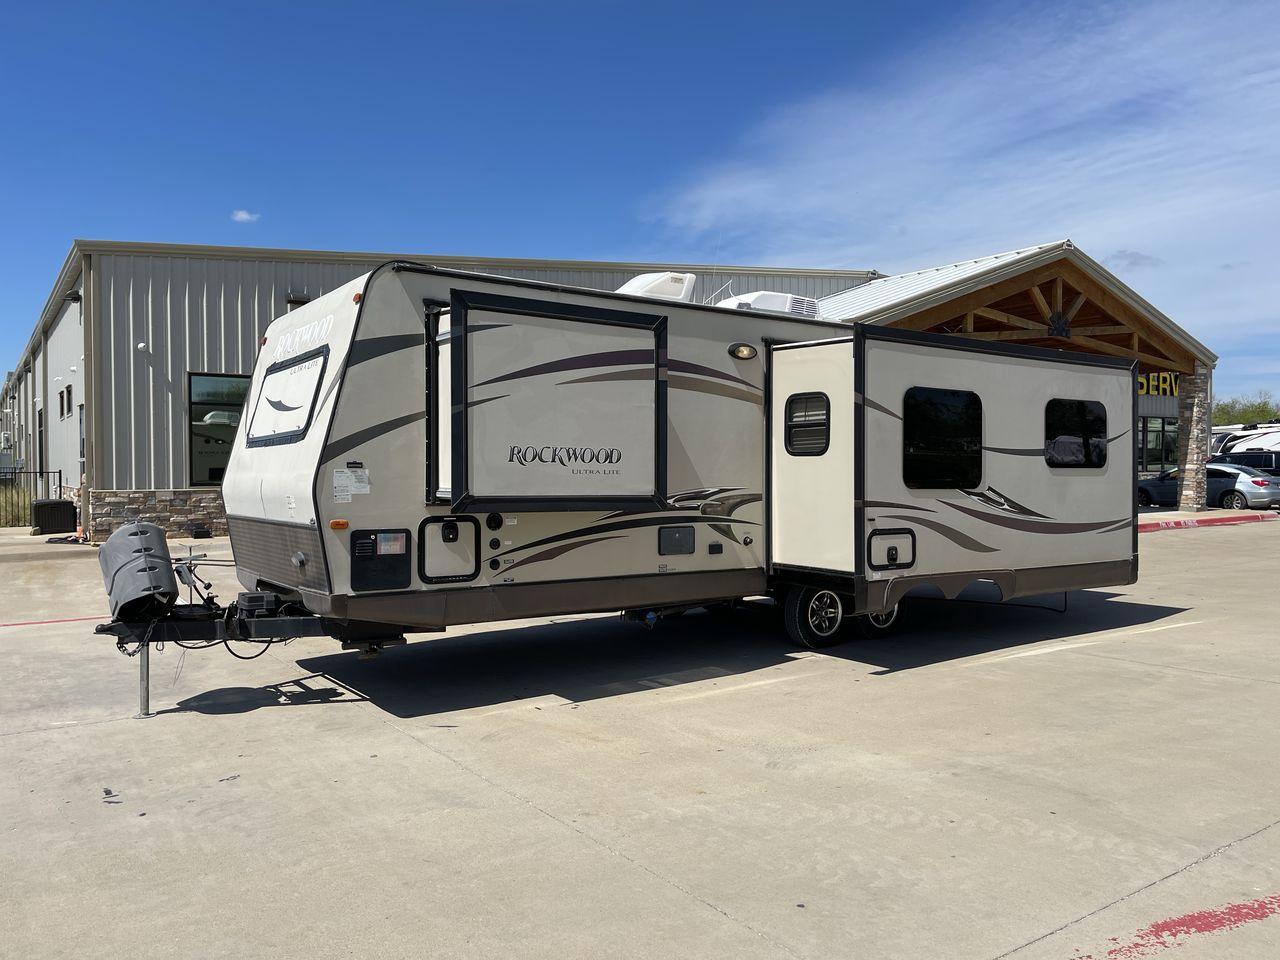 2014 FOREST RIVER ROCKWOOD 2604WS (4X4TRLB26ED) , Length: 29.67 ft. | Dry Weight: 5,665 lbs. | Slides: 2 transmission, located at 4319 N Main St, Cleburne, TX, 76033, (817) 678-5133, 32.385960, -97.391212 - Looking for a lightweight, fully-equipped travel trailer under 30 feet? Check out this 2014 Forest River Rockwood 2604WS! This trailer measures exactly 29.67 ft. in length and 9.58 ft. in height. It has a dry weight of 5,665 lbs. and a manageable hitch weight of 711 lbs. It includes two slides and a - Photo #24